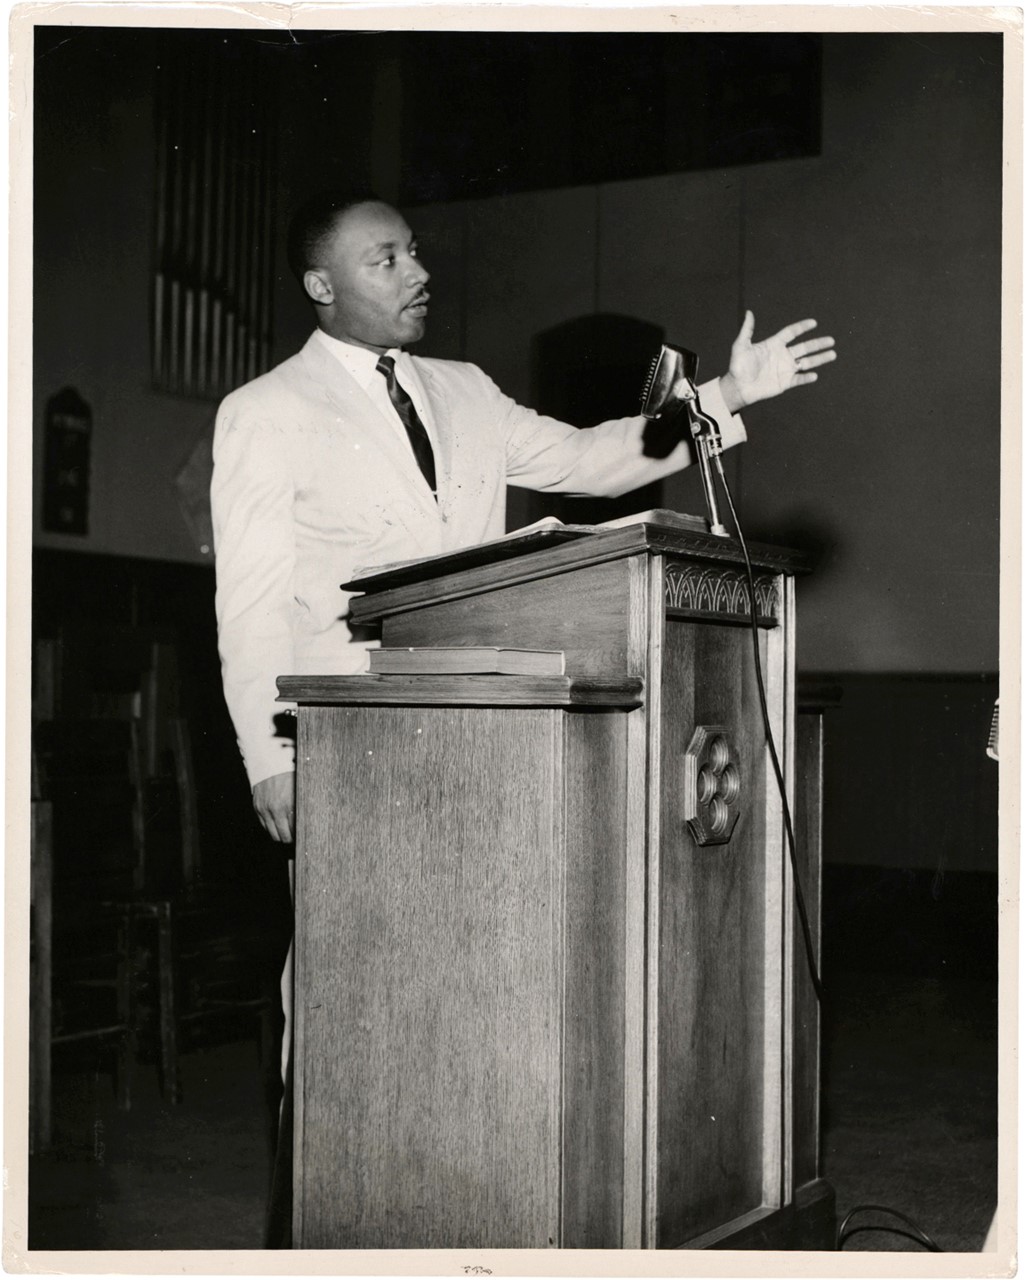 Dr. Martin Luther King at the Pulpit Photograph (PSA Type I)